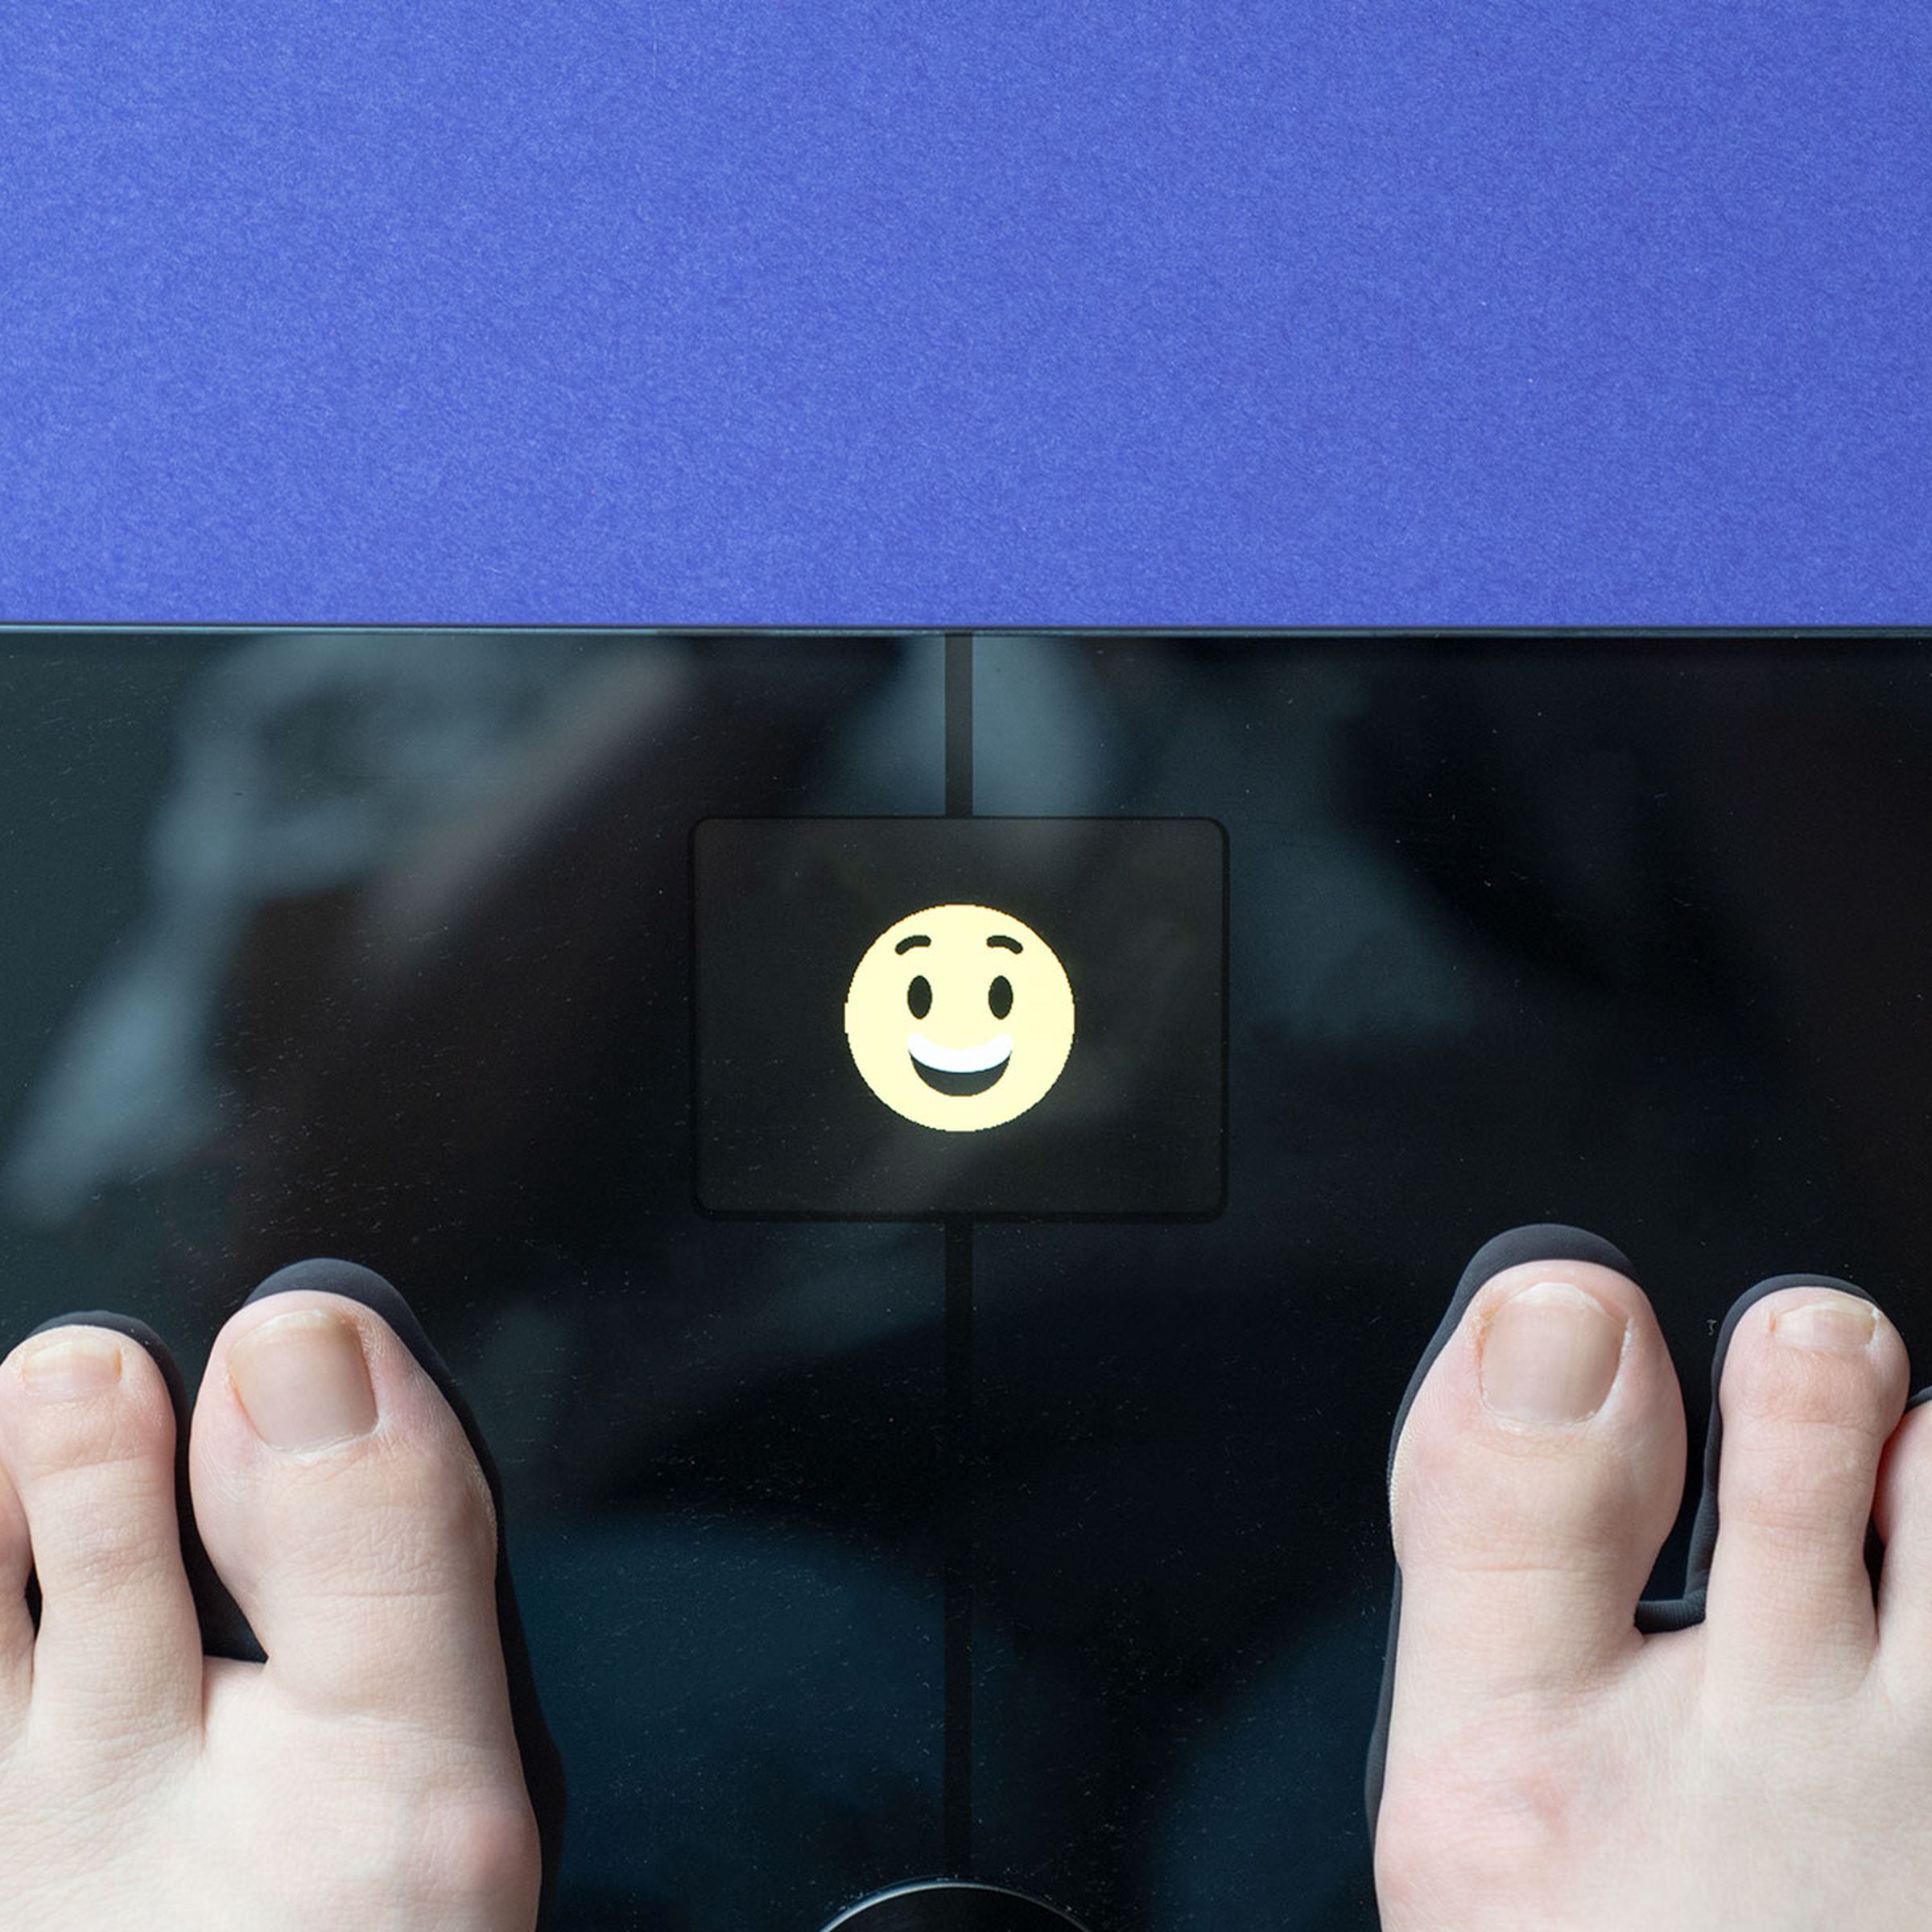 Person standing on scale with smiley face showing in LED display